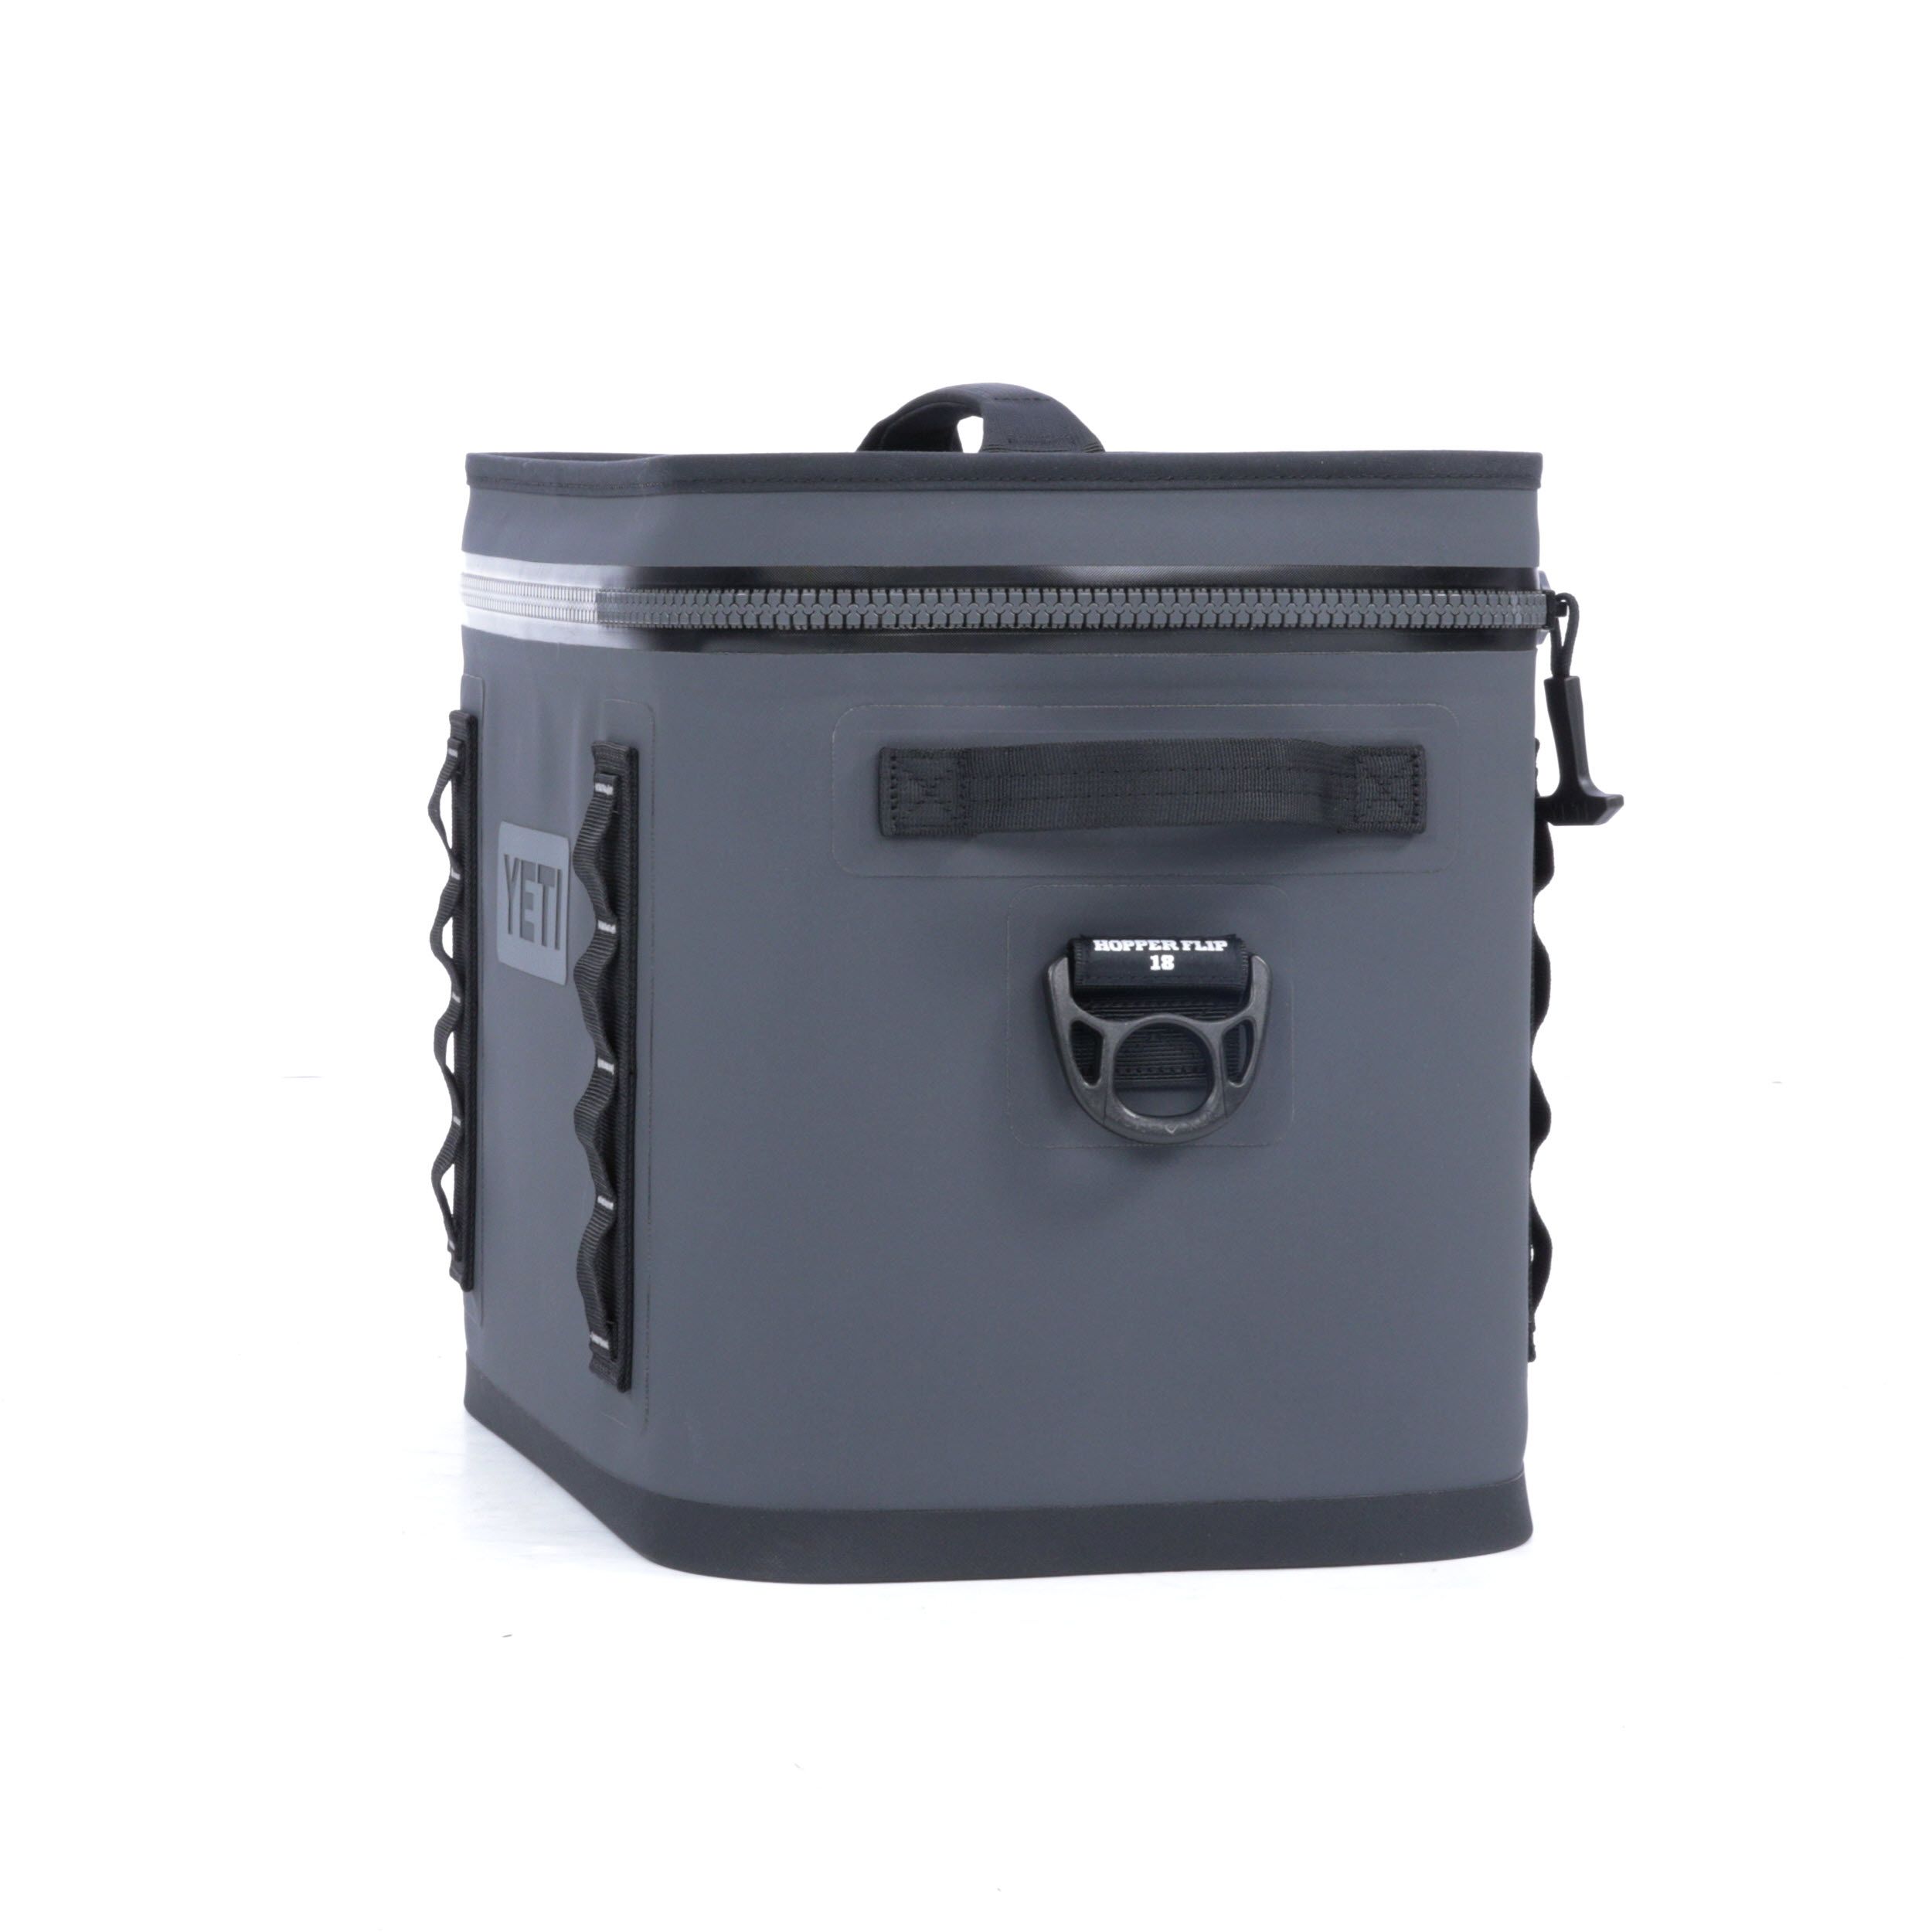 YETI Hopper Flip 18 Insulated Personal Cooler, Charcoal in the 